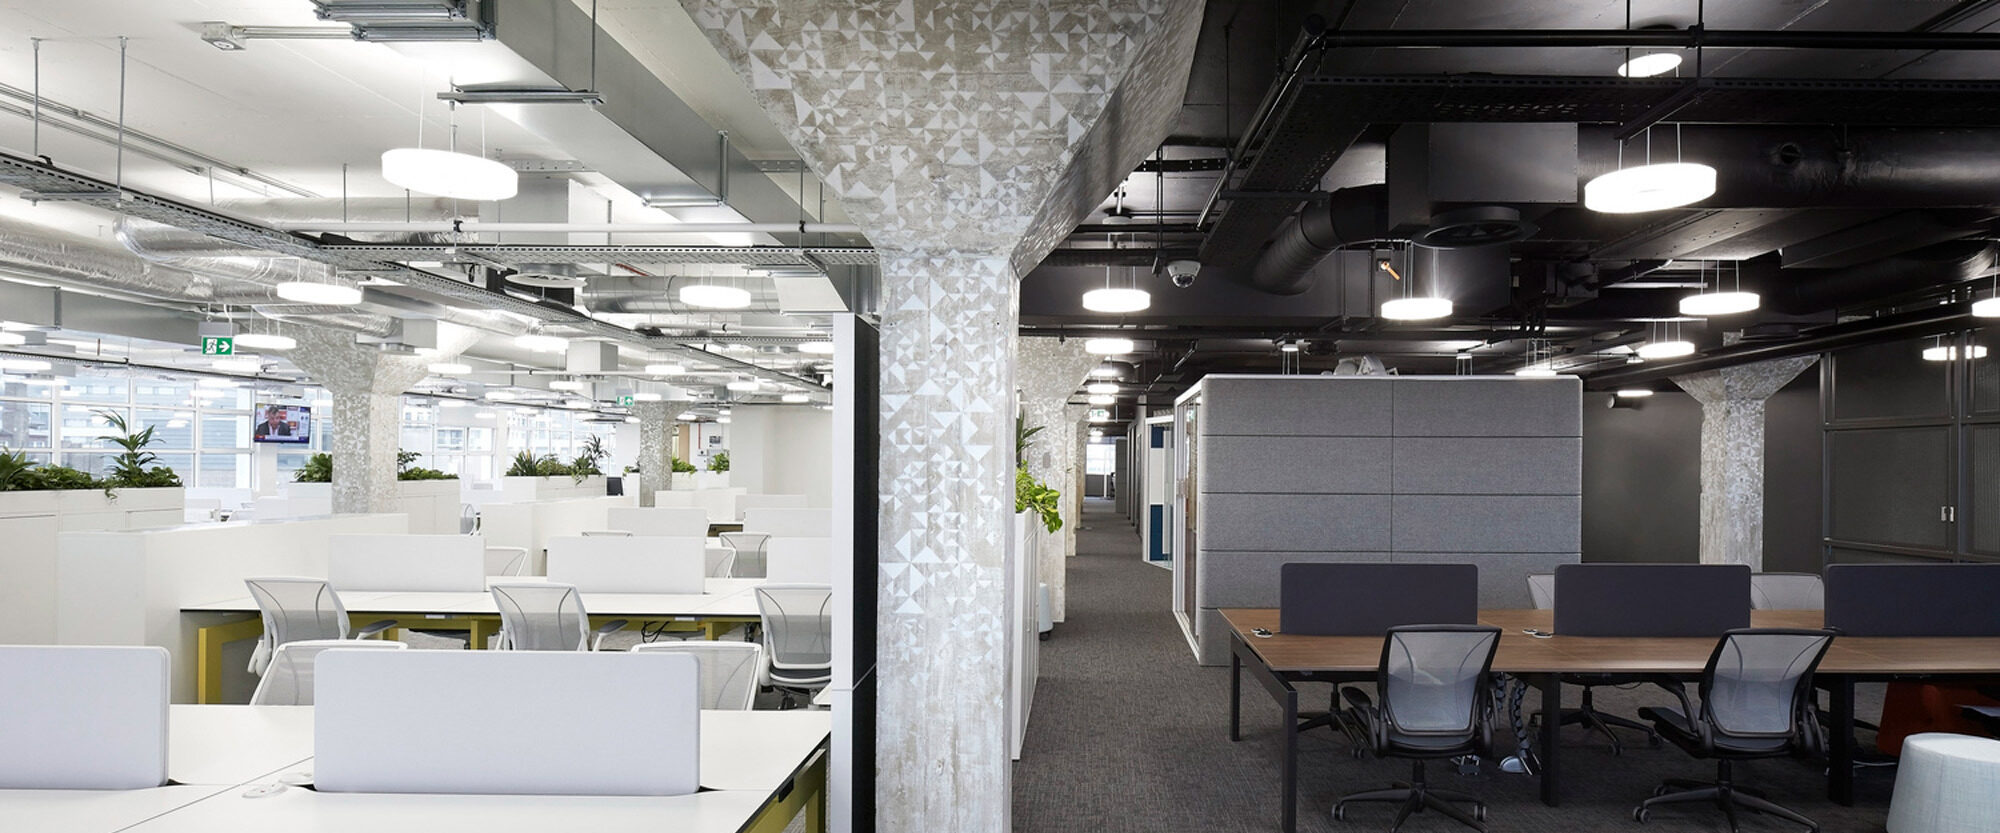 Modern office interior featuring an open-plan layout with white desks, ergonomic chairs, and partition panels for privacy. Exposed ceiling ductwork contrasts with decorative white lattice columns, while pendant lights illuminate the space evenly.